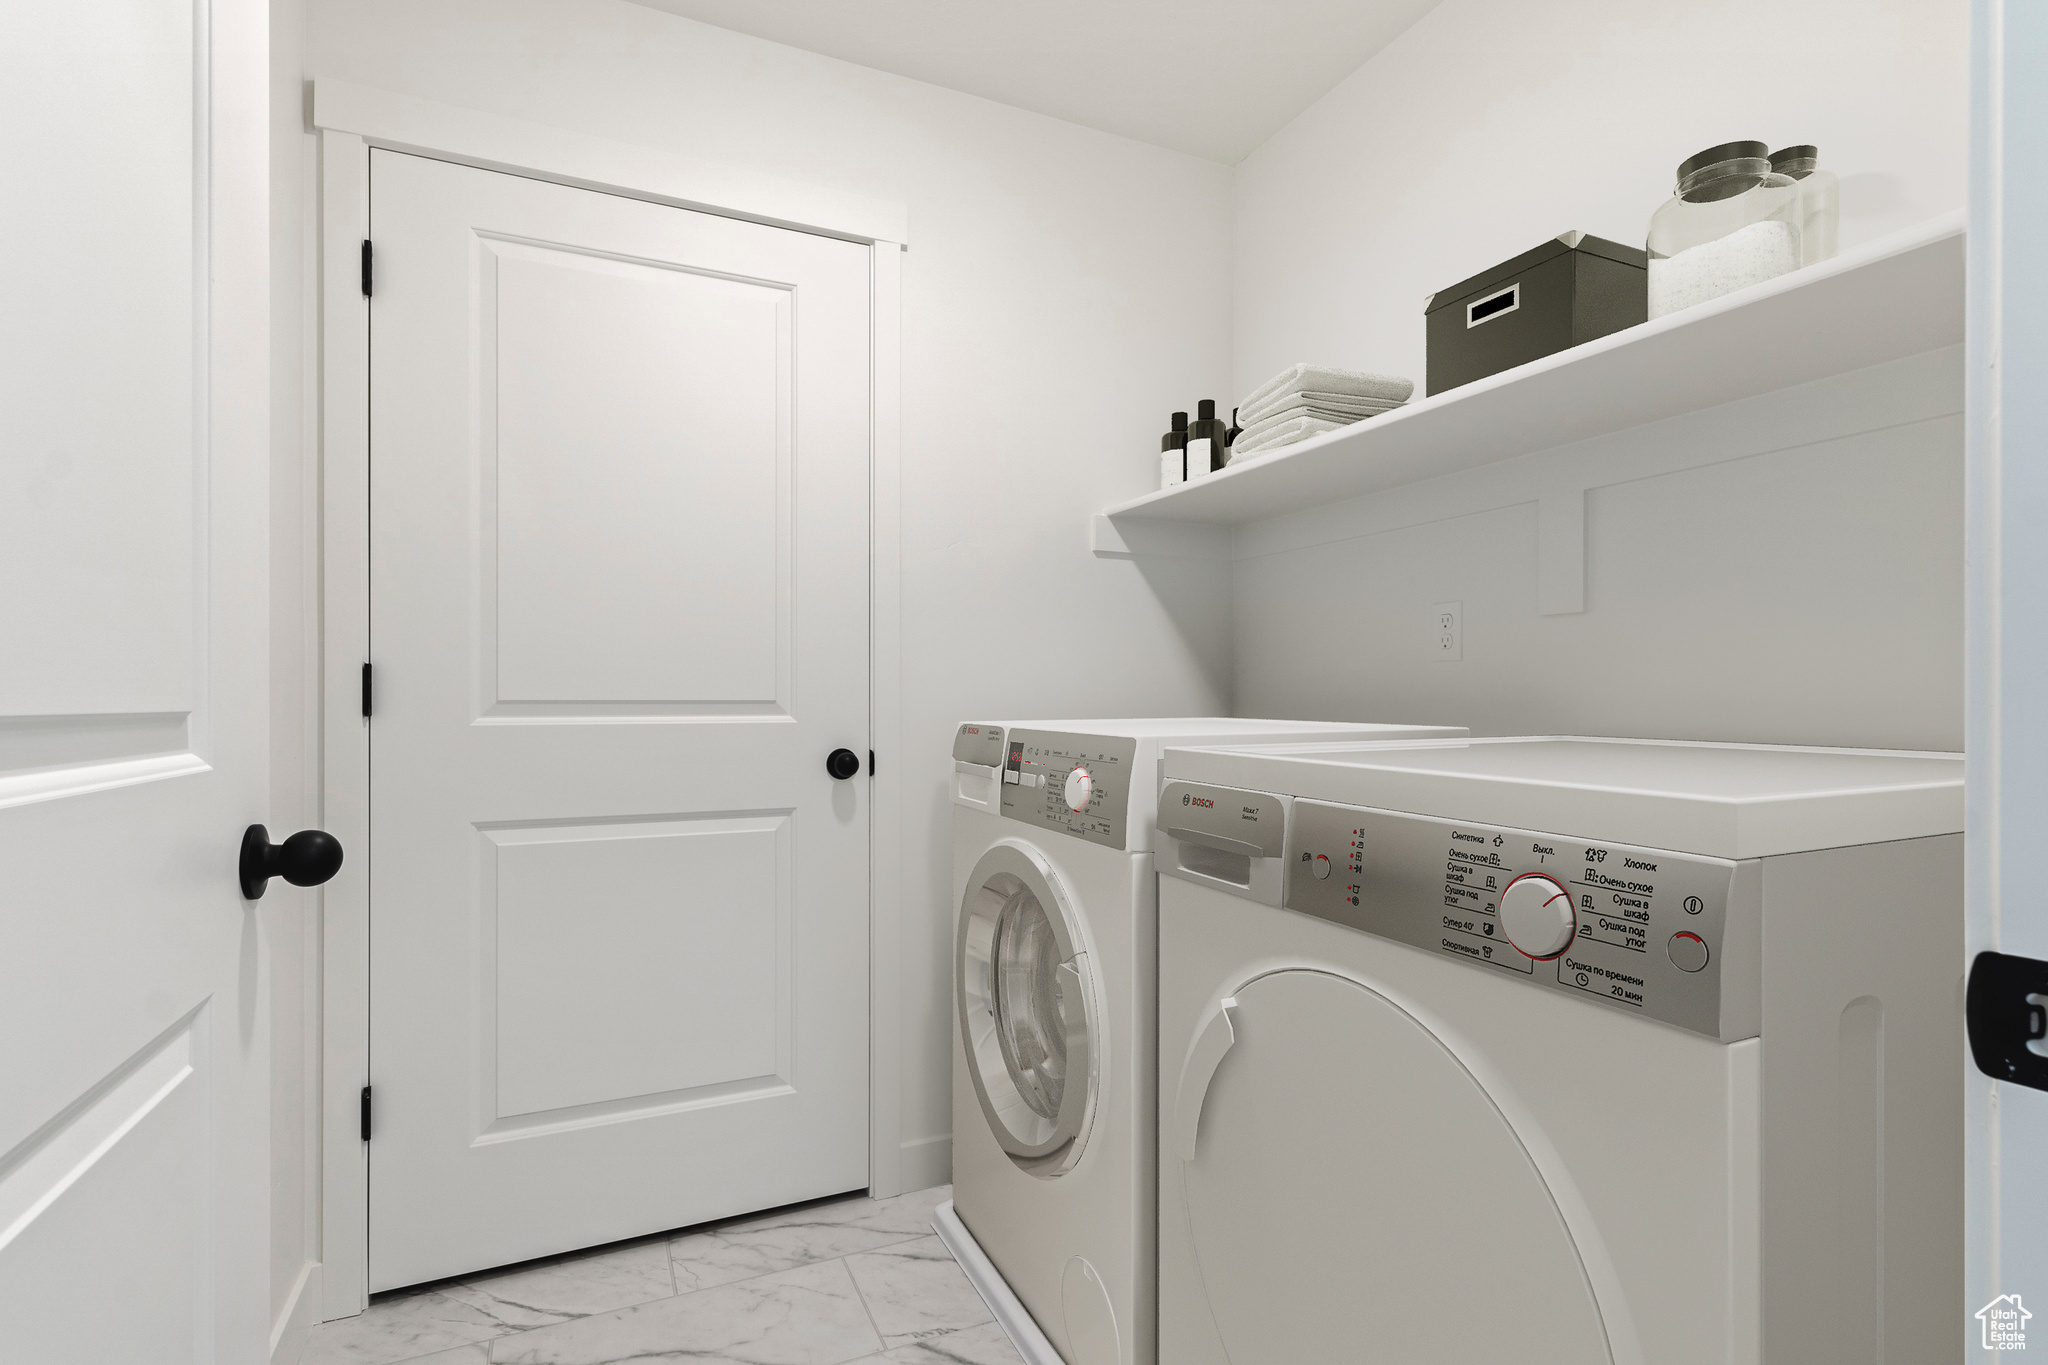 Washroom featuring light tile flooring and washing machine and clothes dryer